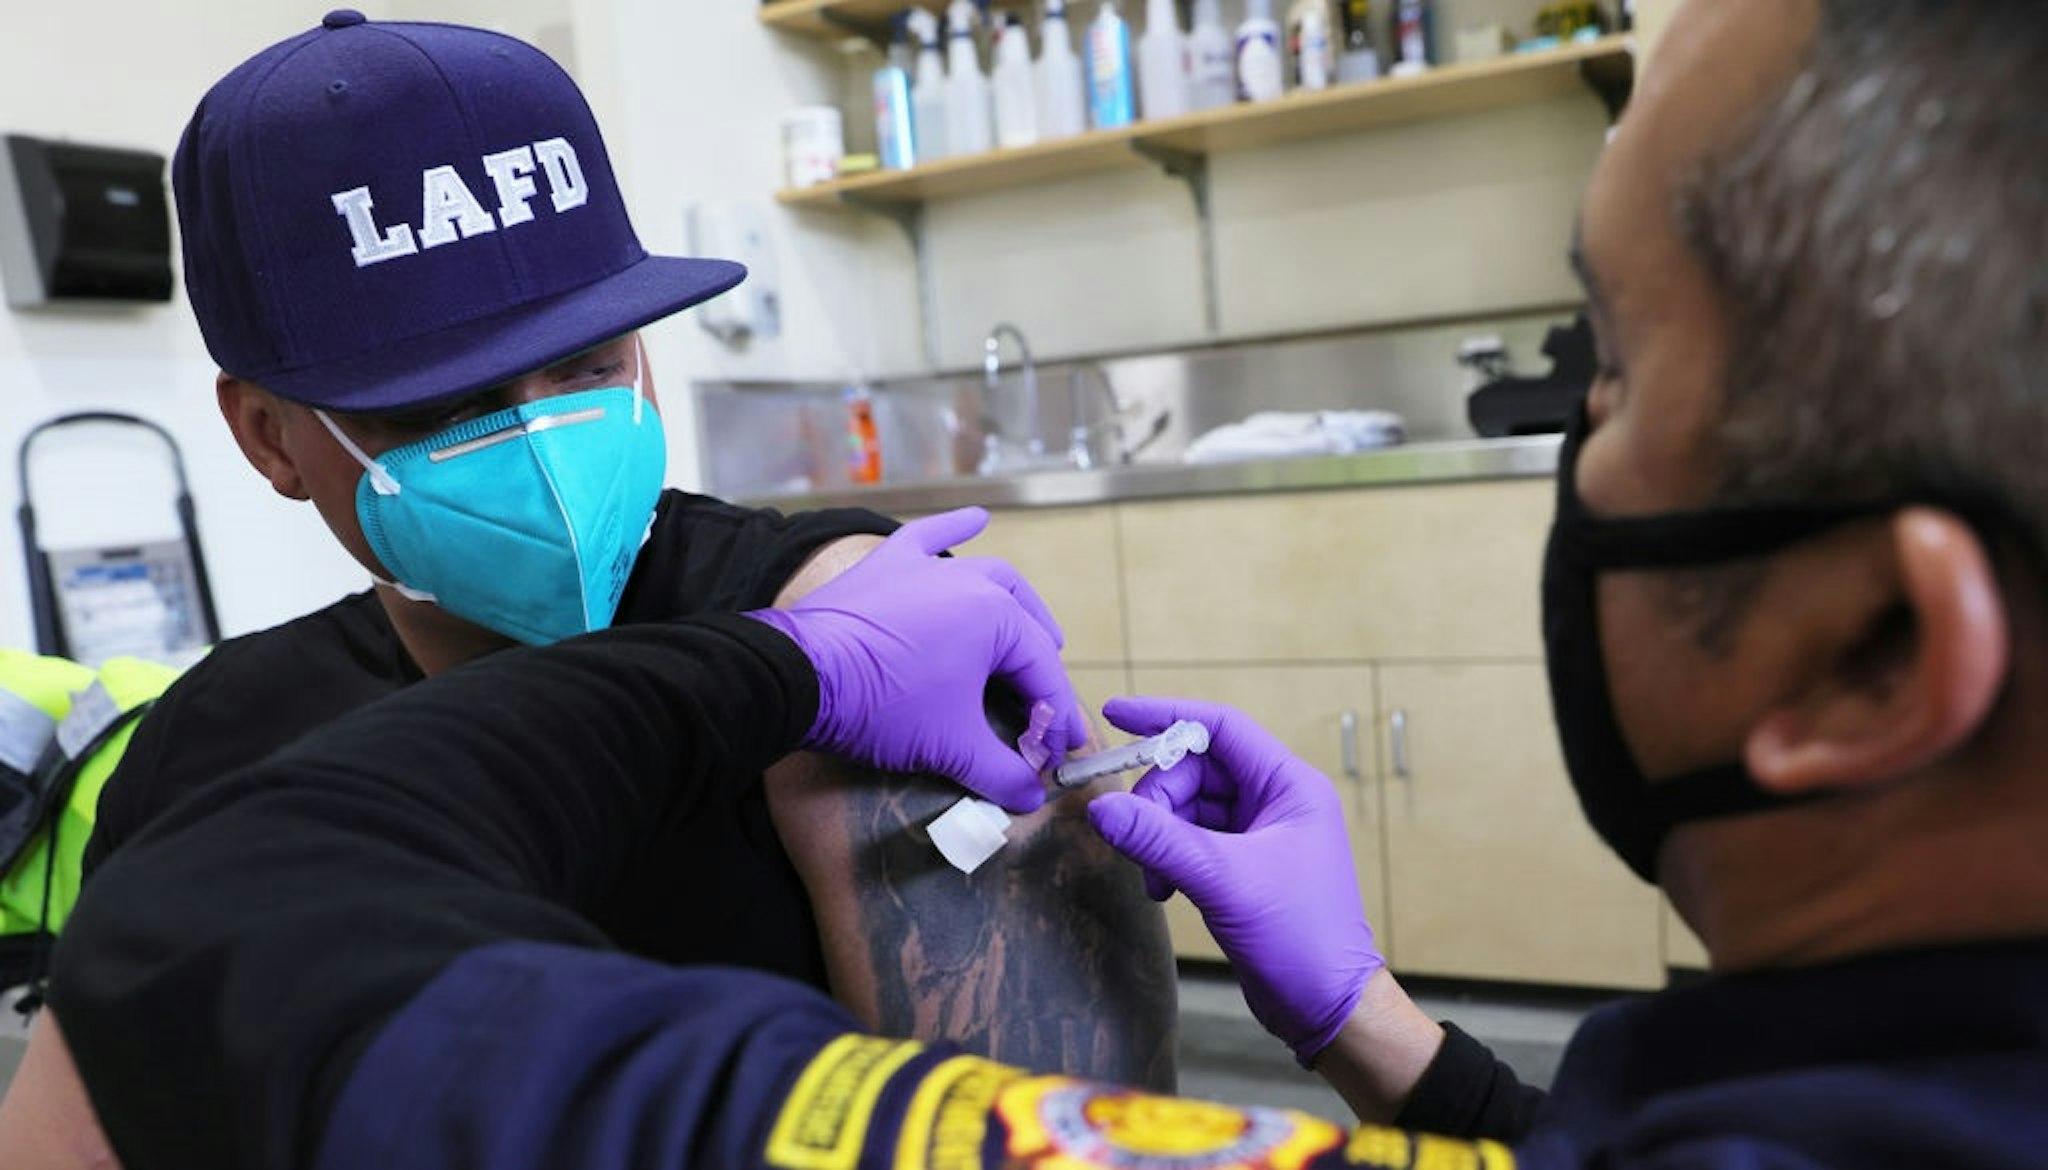 LOS ANGELES, CALIFORNIA - JANUARY 29: A Los Angeles Fire Department (LAFD) firefighter receives a COVID-19 vaccination dose from firefighter paramedic Alexander Gorme (R) at a fire station on January 29, 2021 in Los Angeles, California.